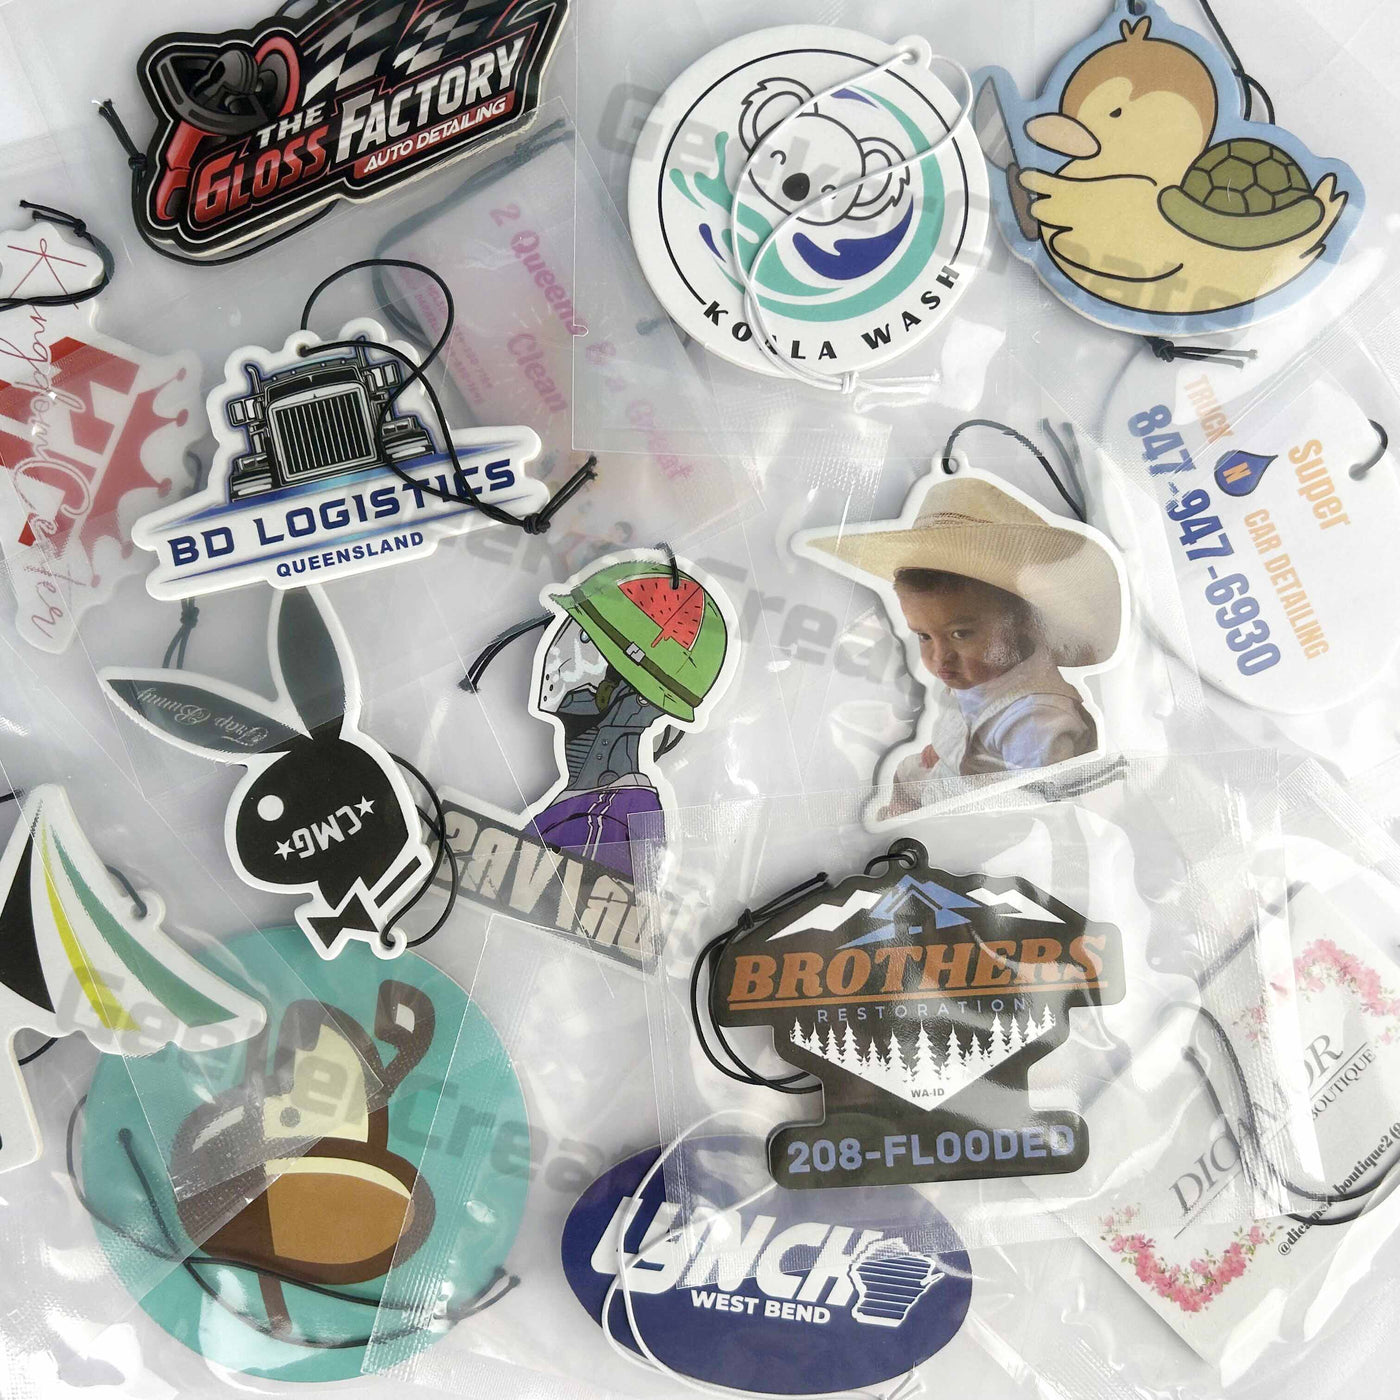 Custom Air Fresheners with your brand logo for car wash detailing business promotion gifts